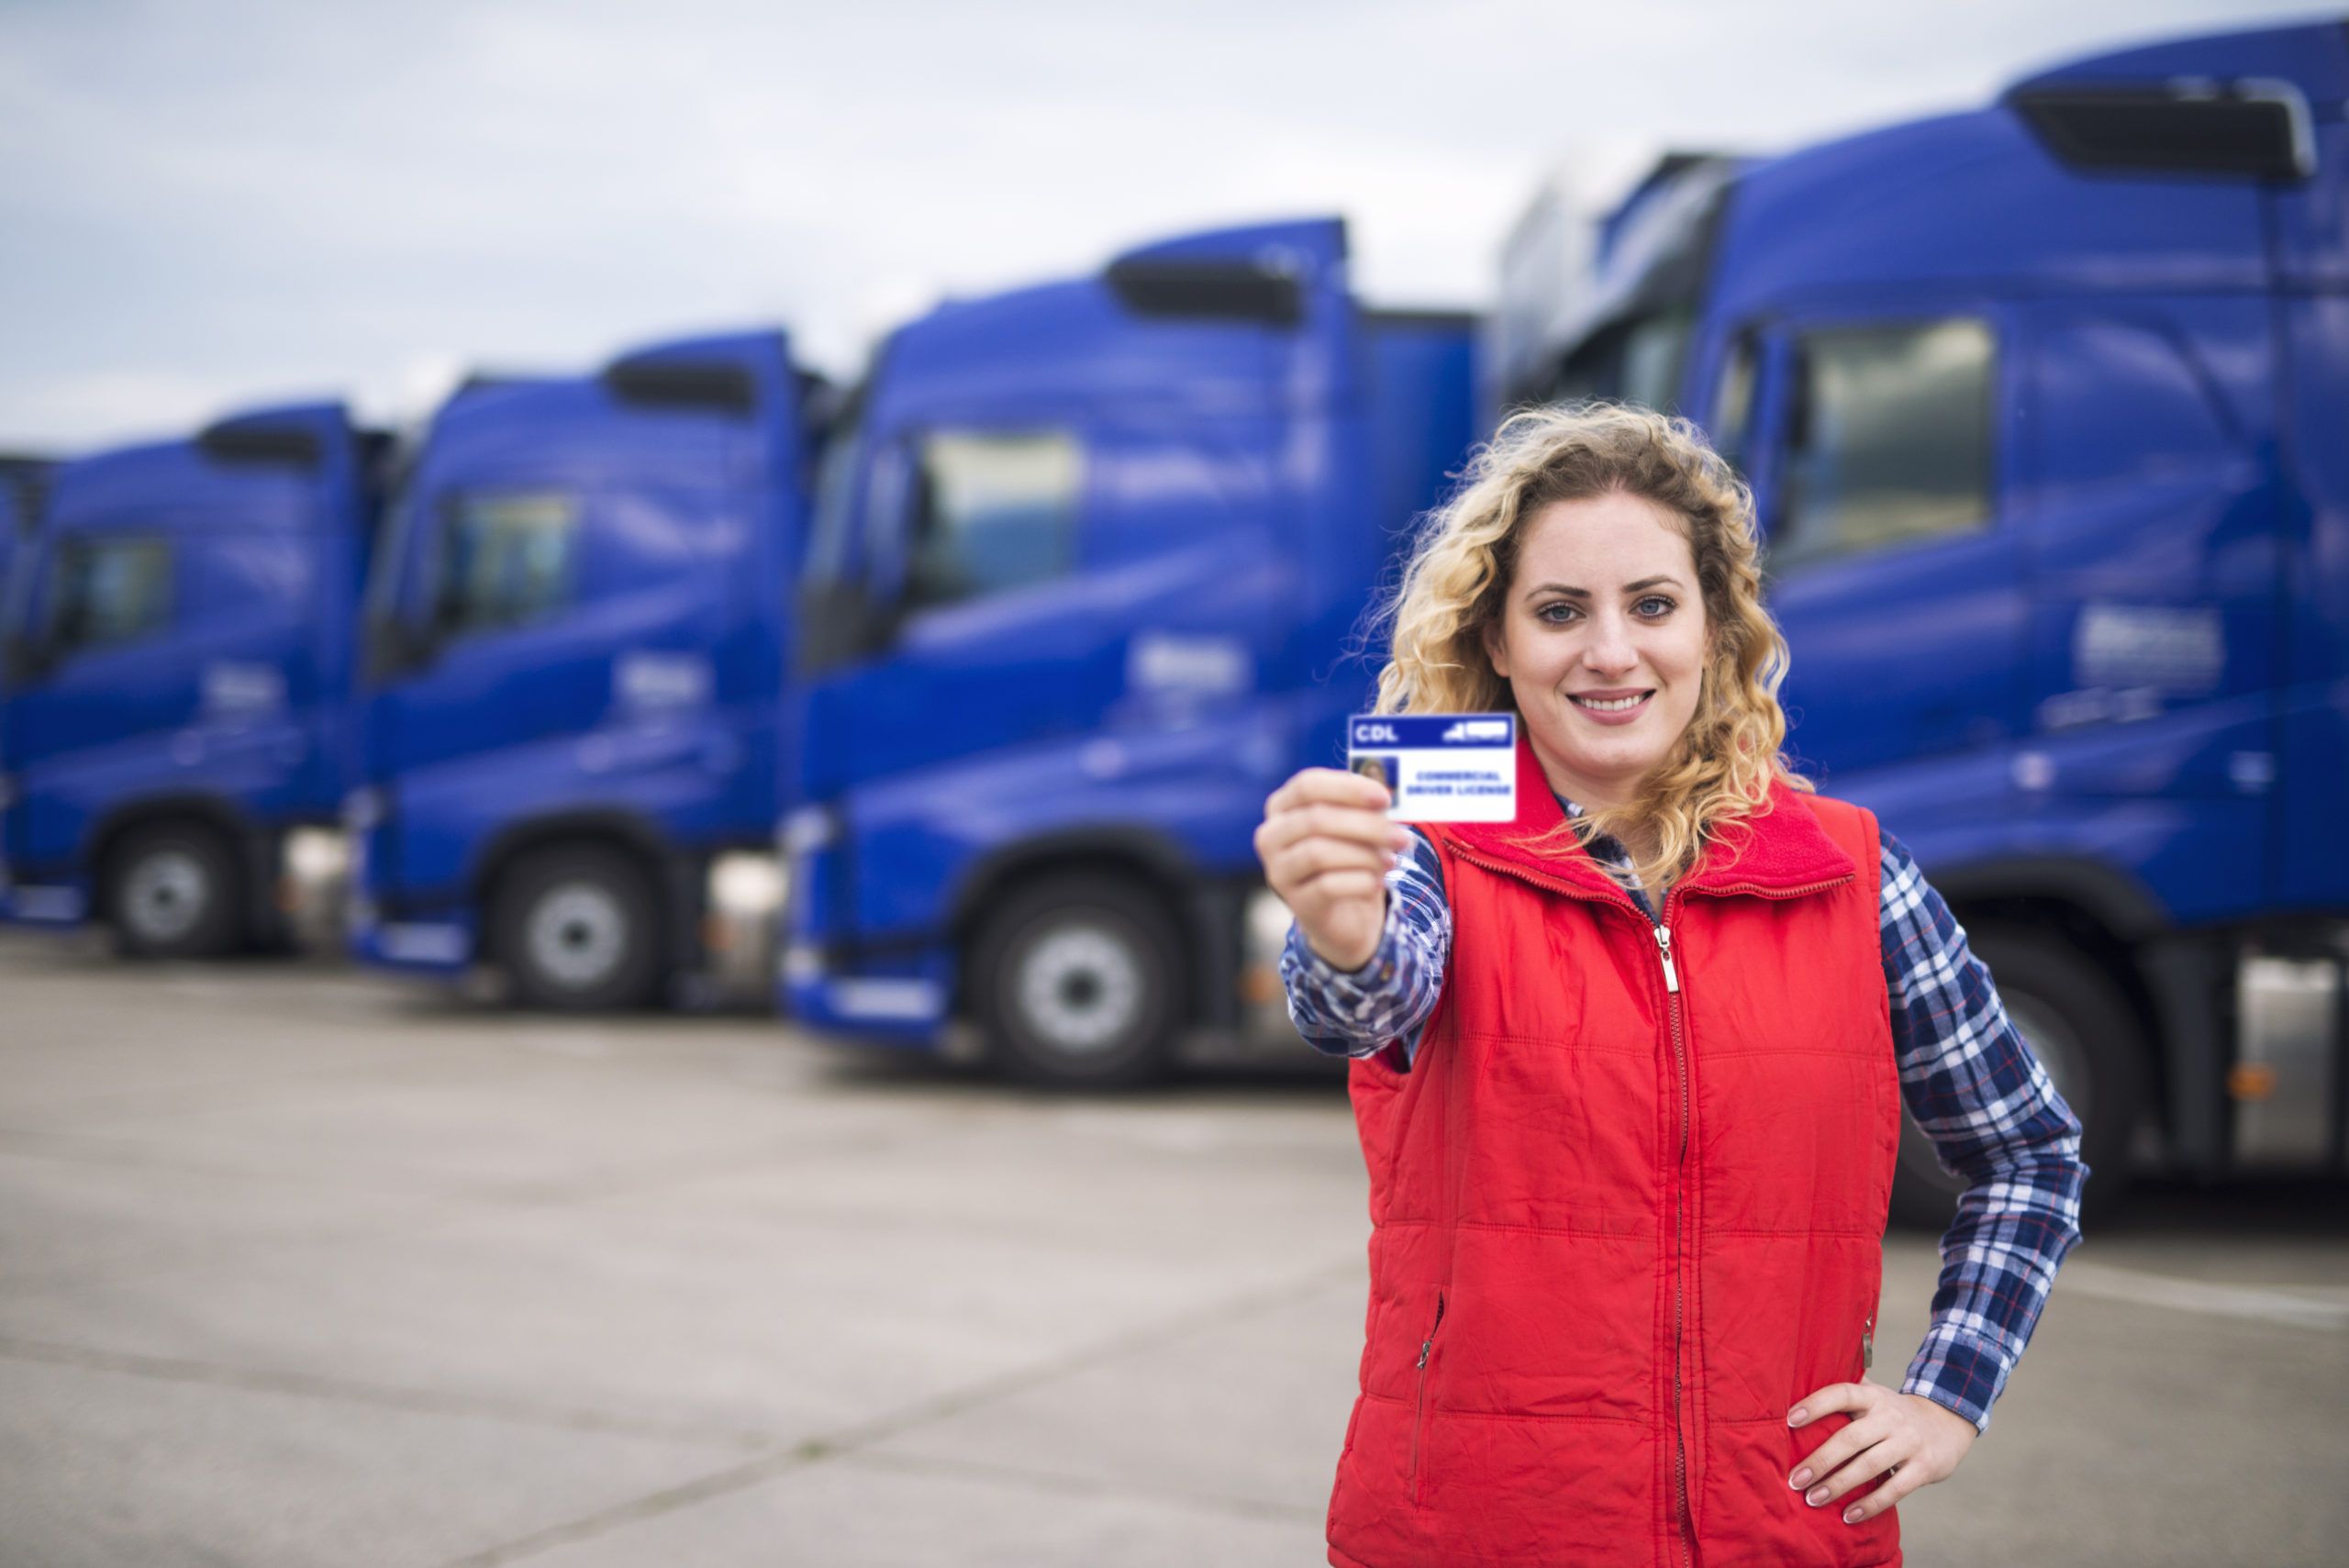 Woman truck driver proudly holding commercial driving license. I